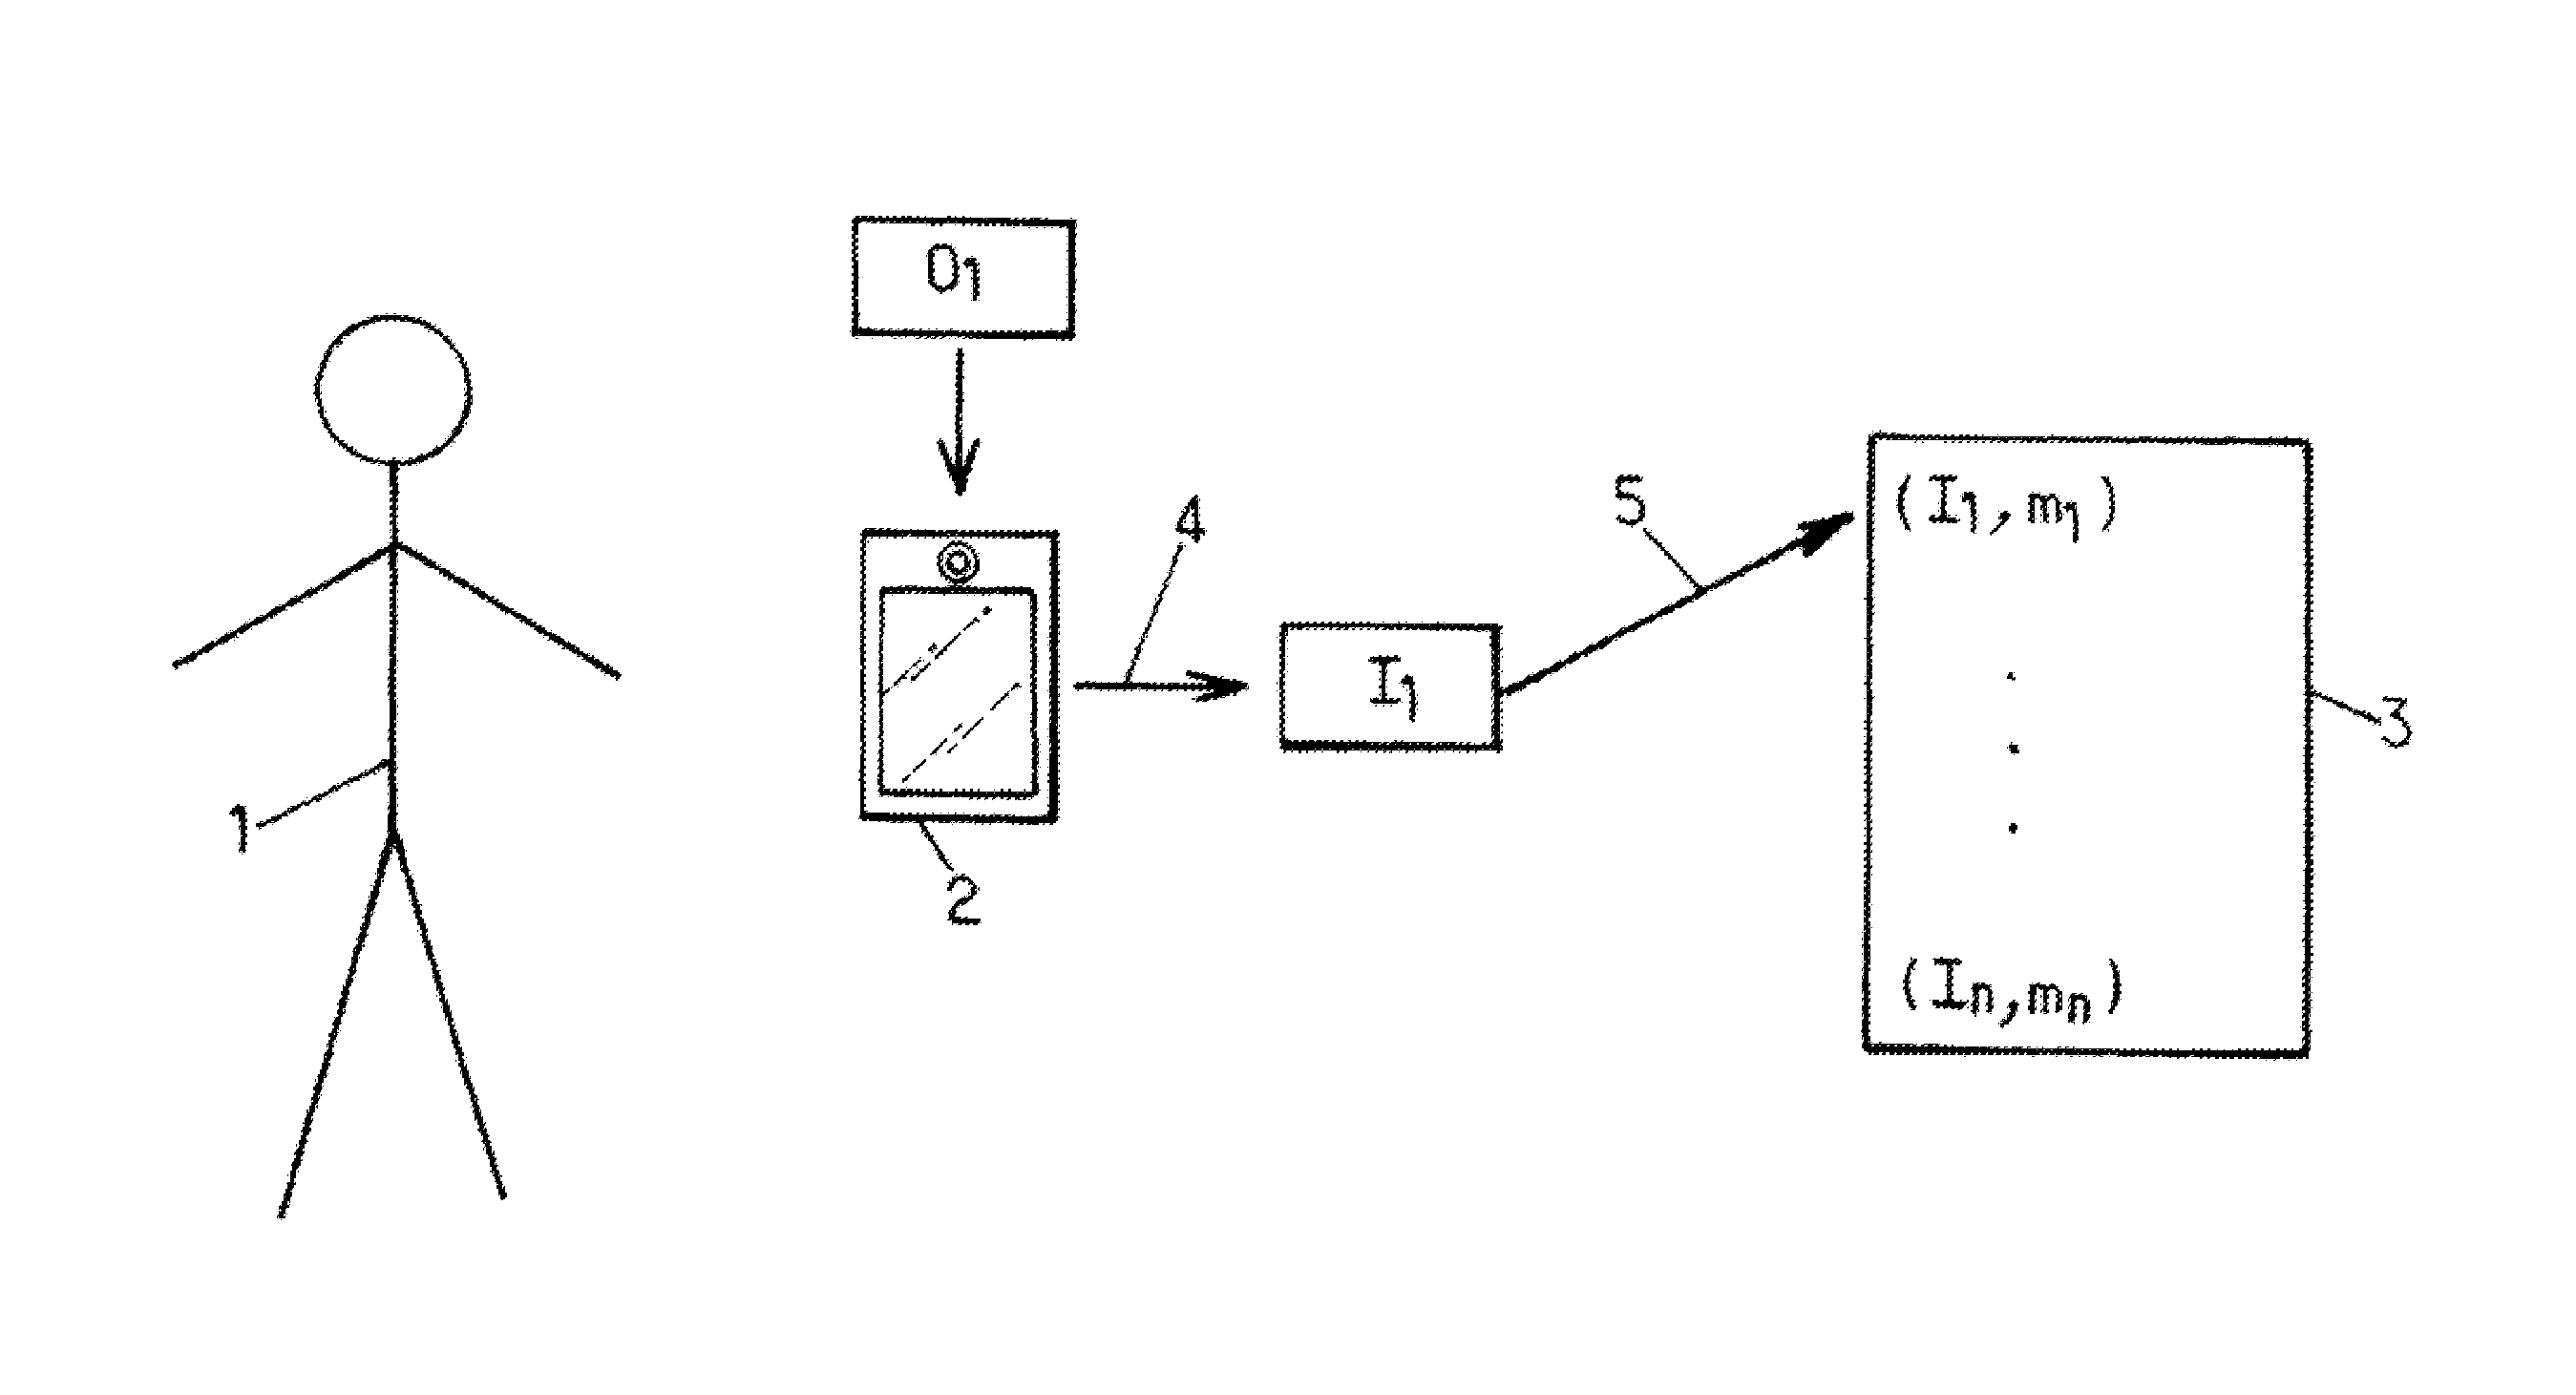 Method for enabling authentication or identification, and related verification system